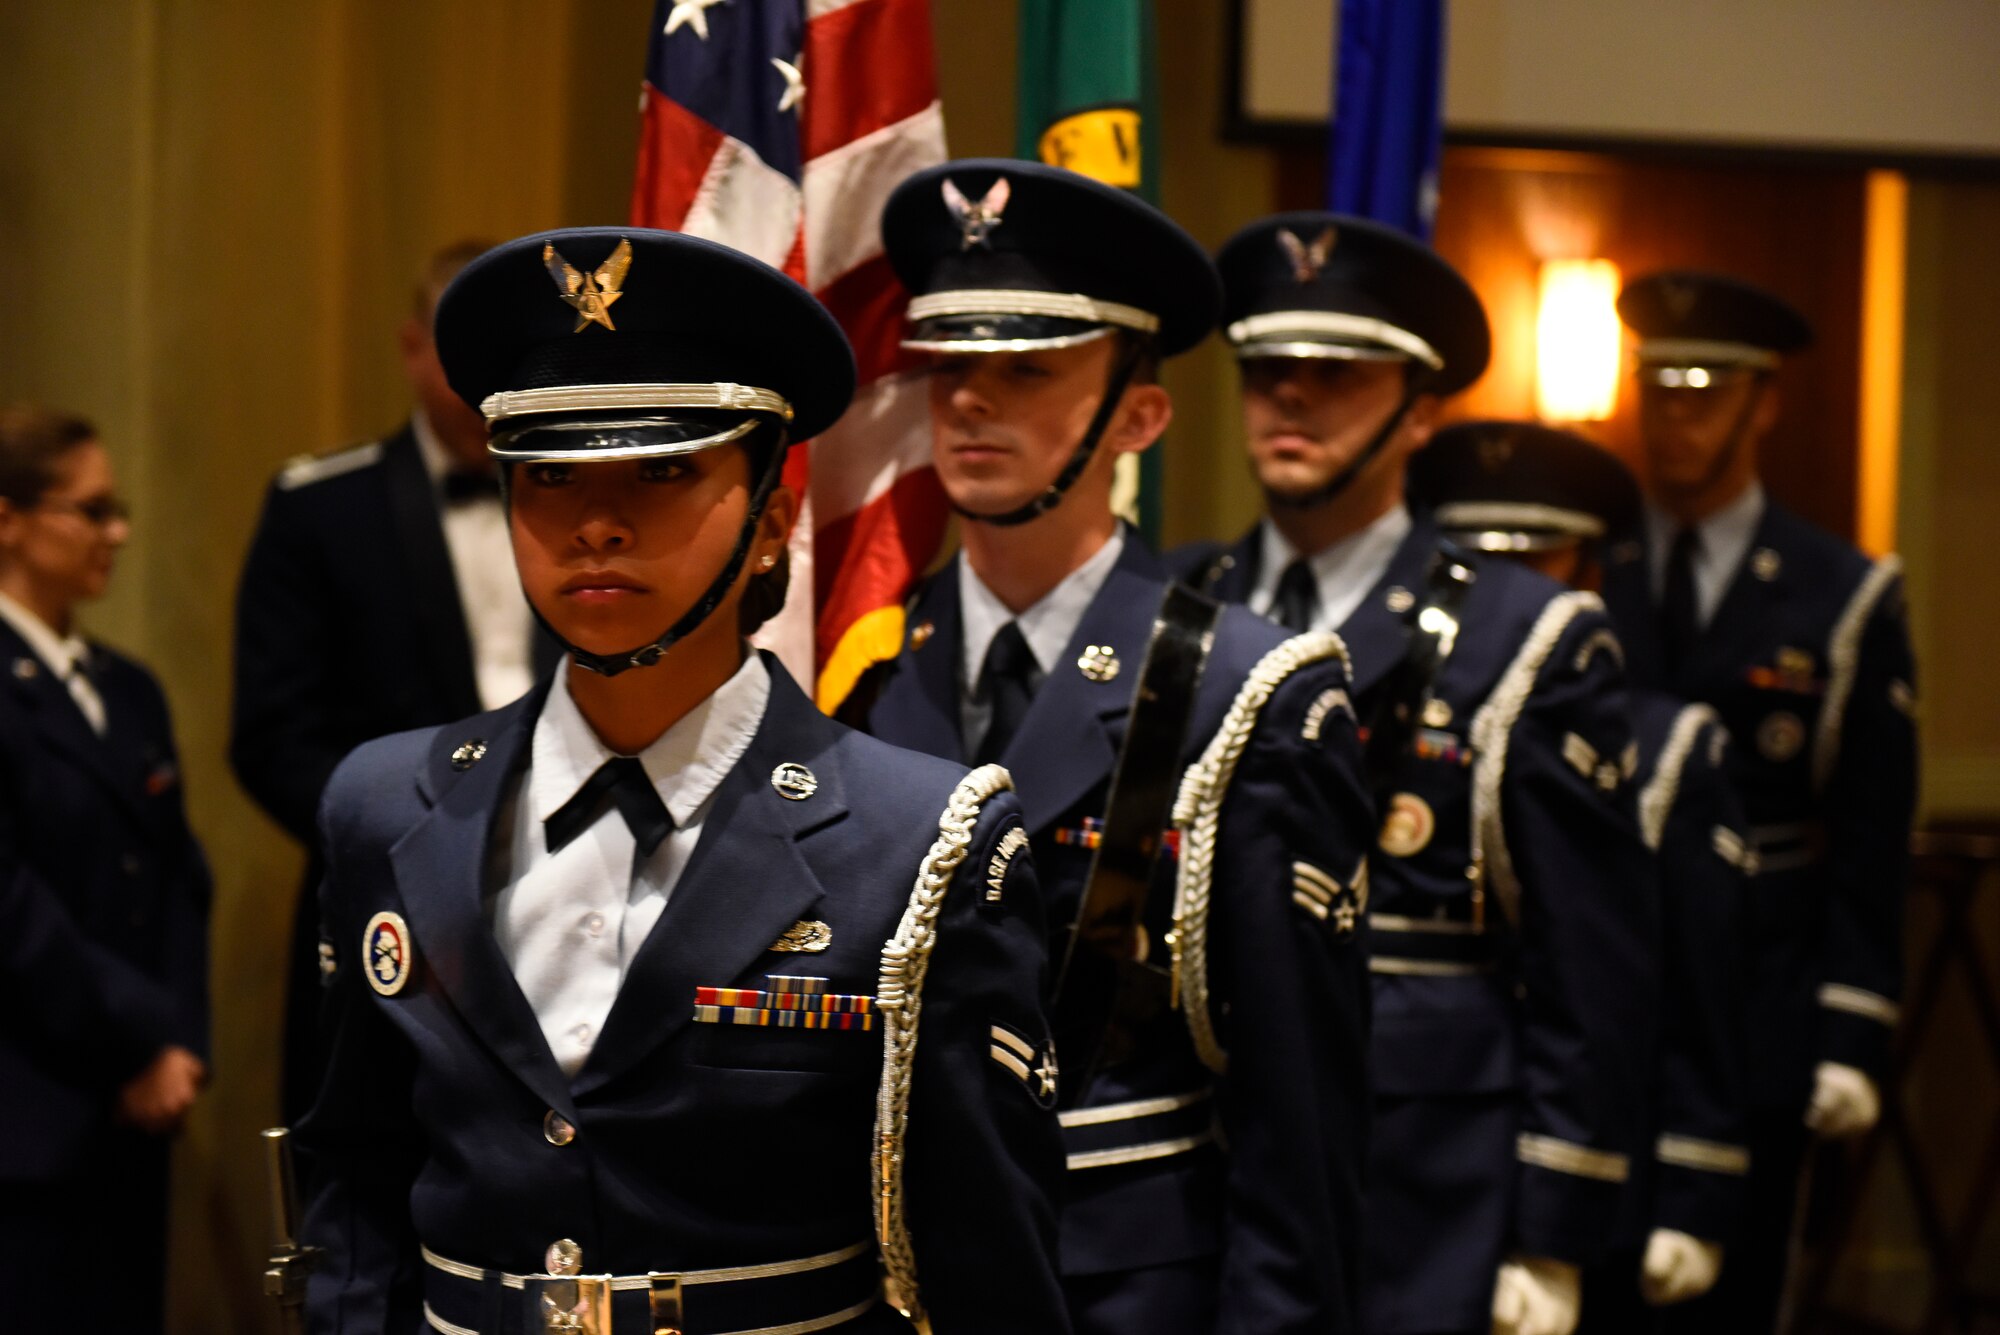 The Fairchild Base Honor Guard prepares to present the colors at Fairchild's Air Force Ball at Northern Quest Resort and Casino in Airway Heights, Washington, Sept. 15, 2018. The Air Force Ball is an annual held throughout the entire Air Force to honor the day the Air Force became a separate branch of service. (U.S. Air Force photo/Airman 1st Class Lawrence Sena)